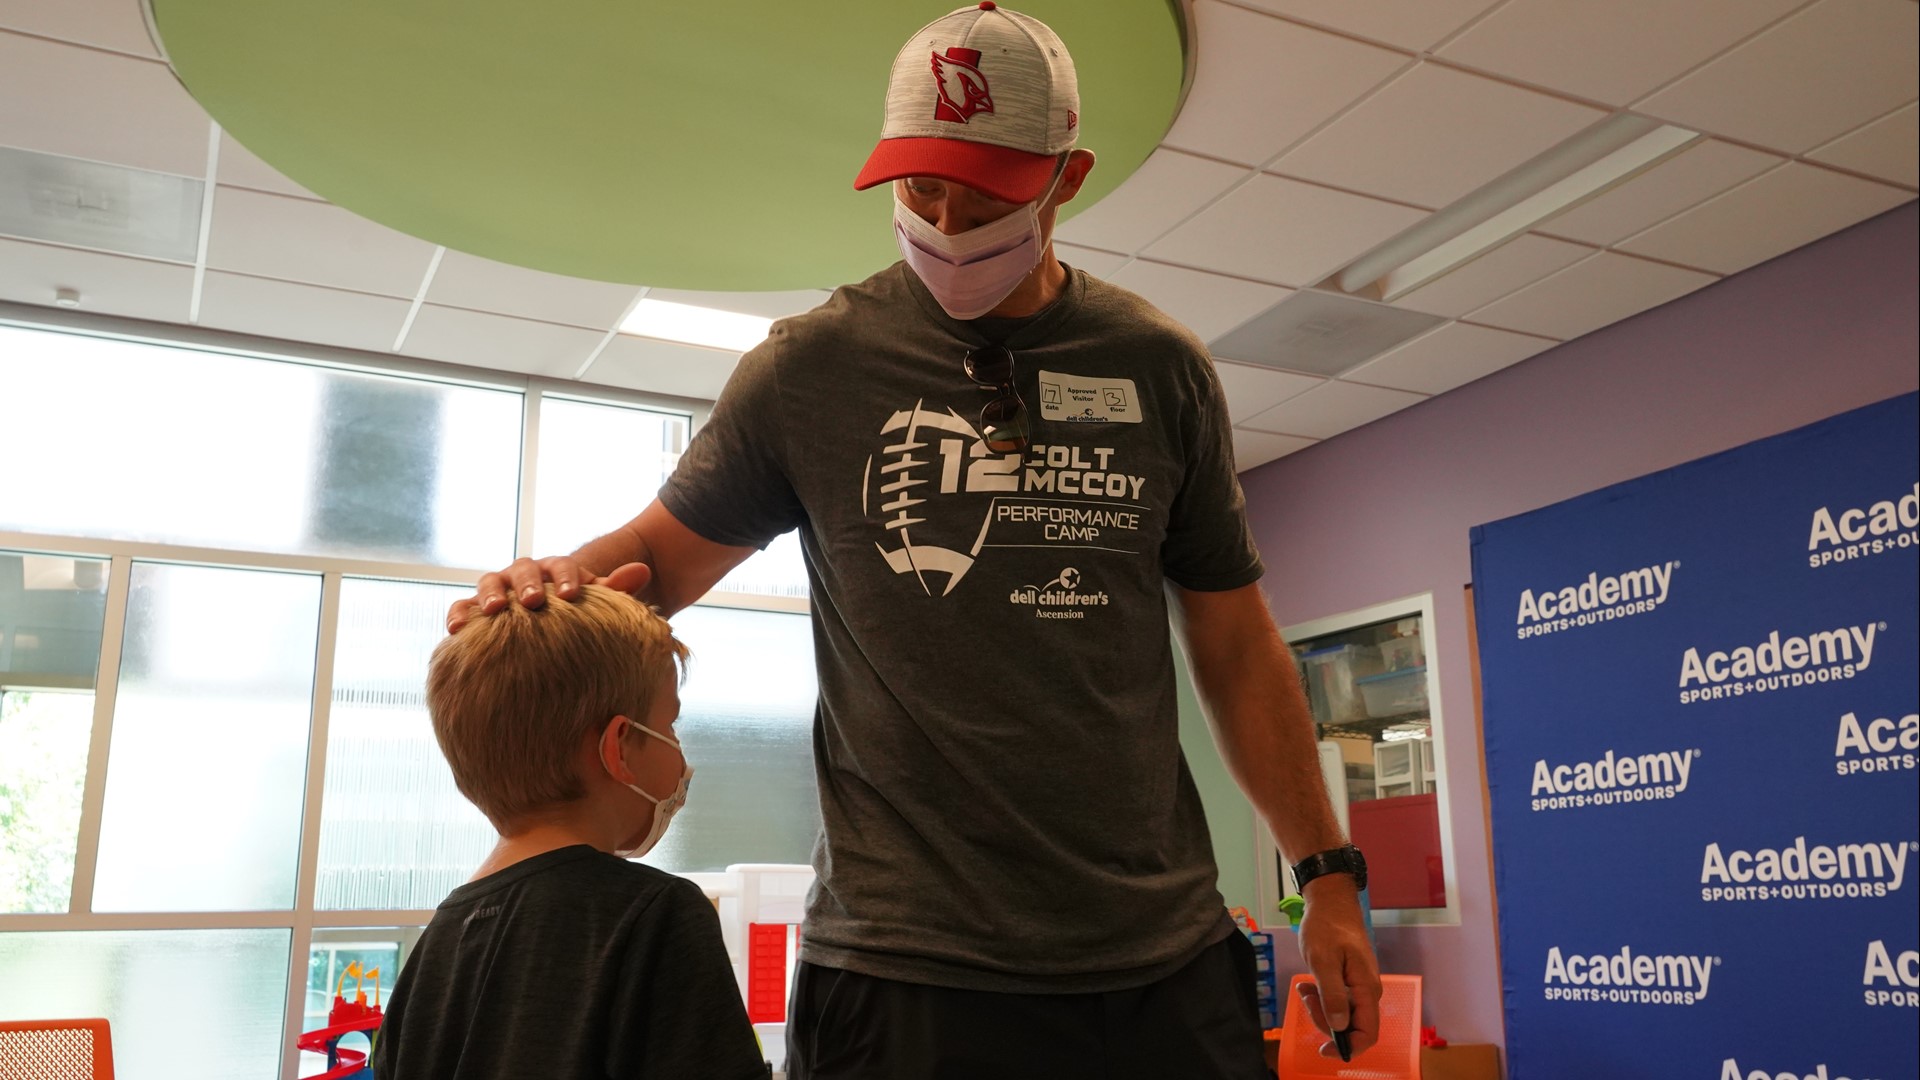 The legendary quarterback met kids receiving treatment and donated $1,500 worth of sports equipment.